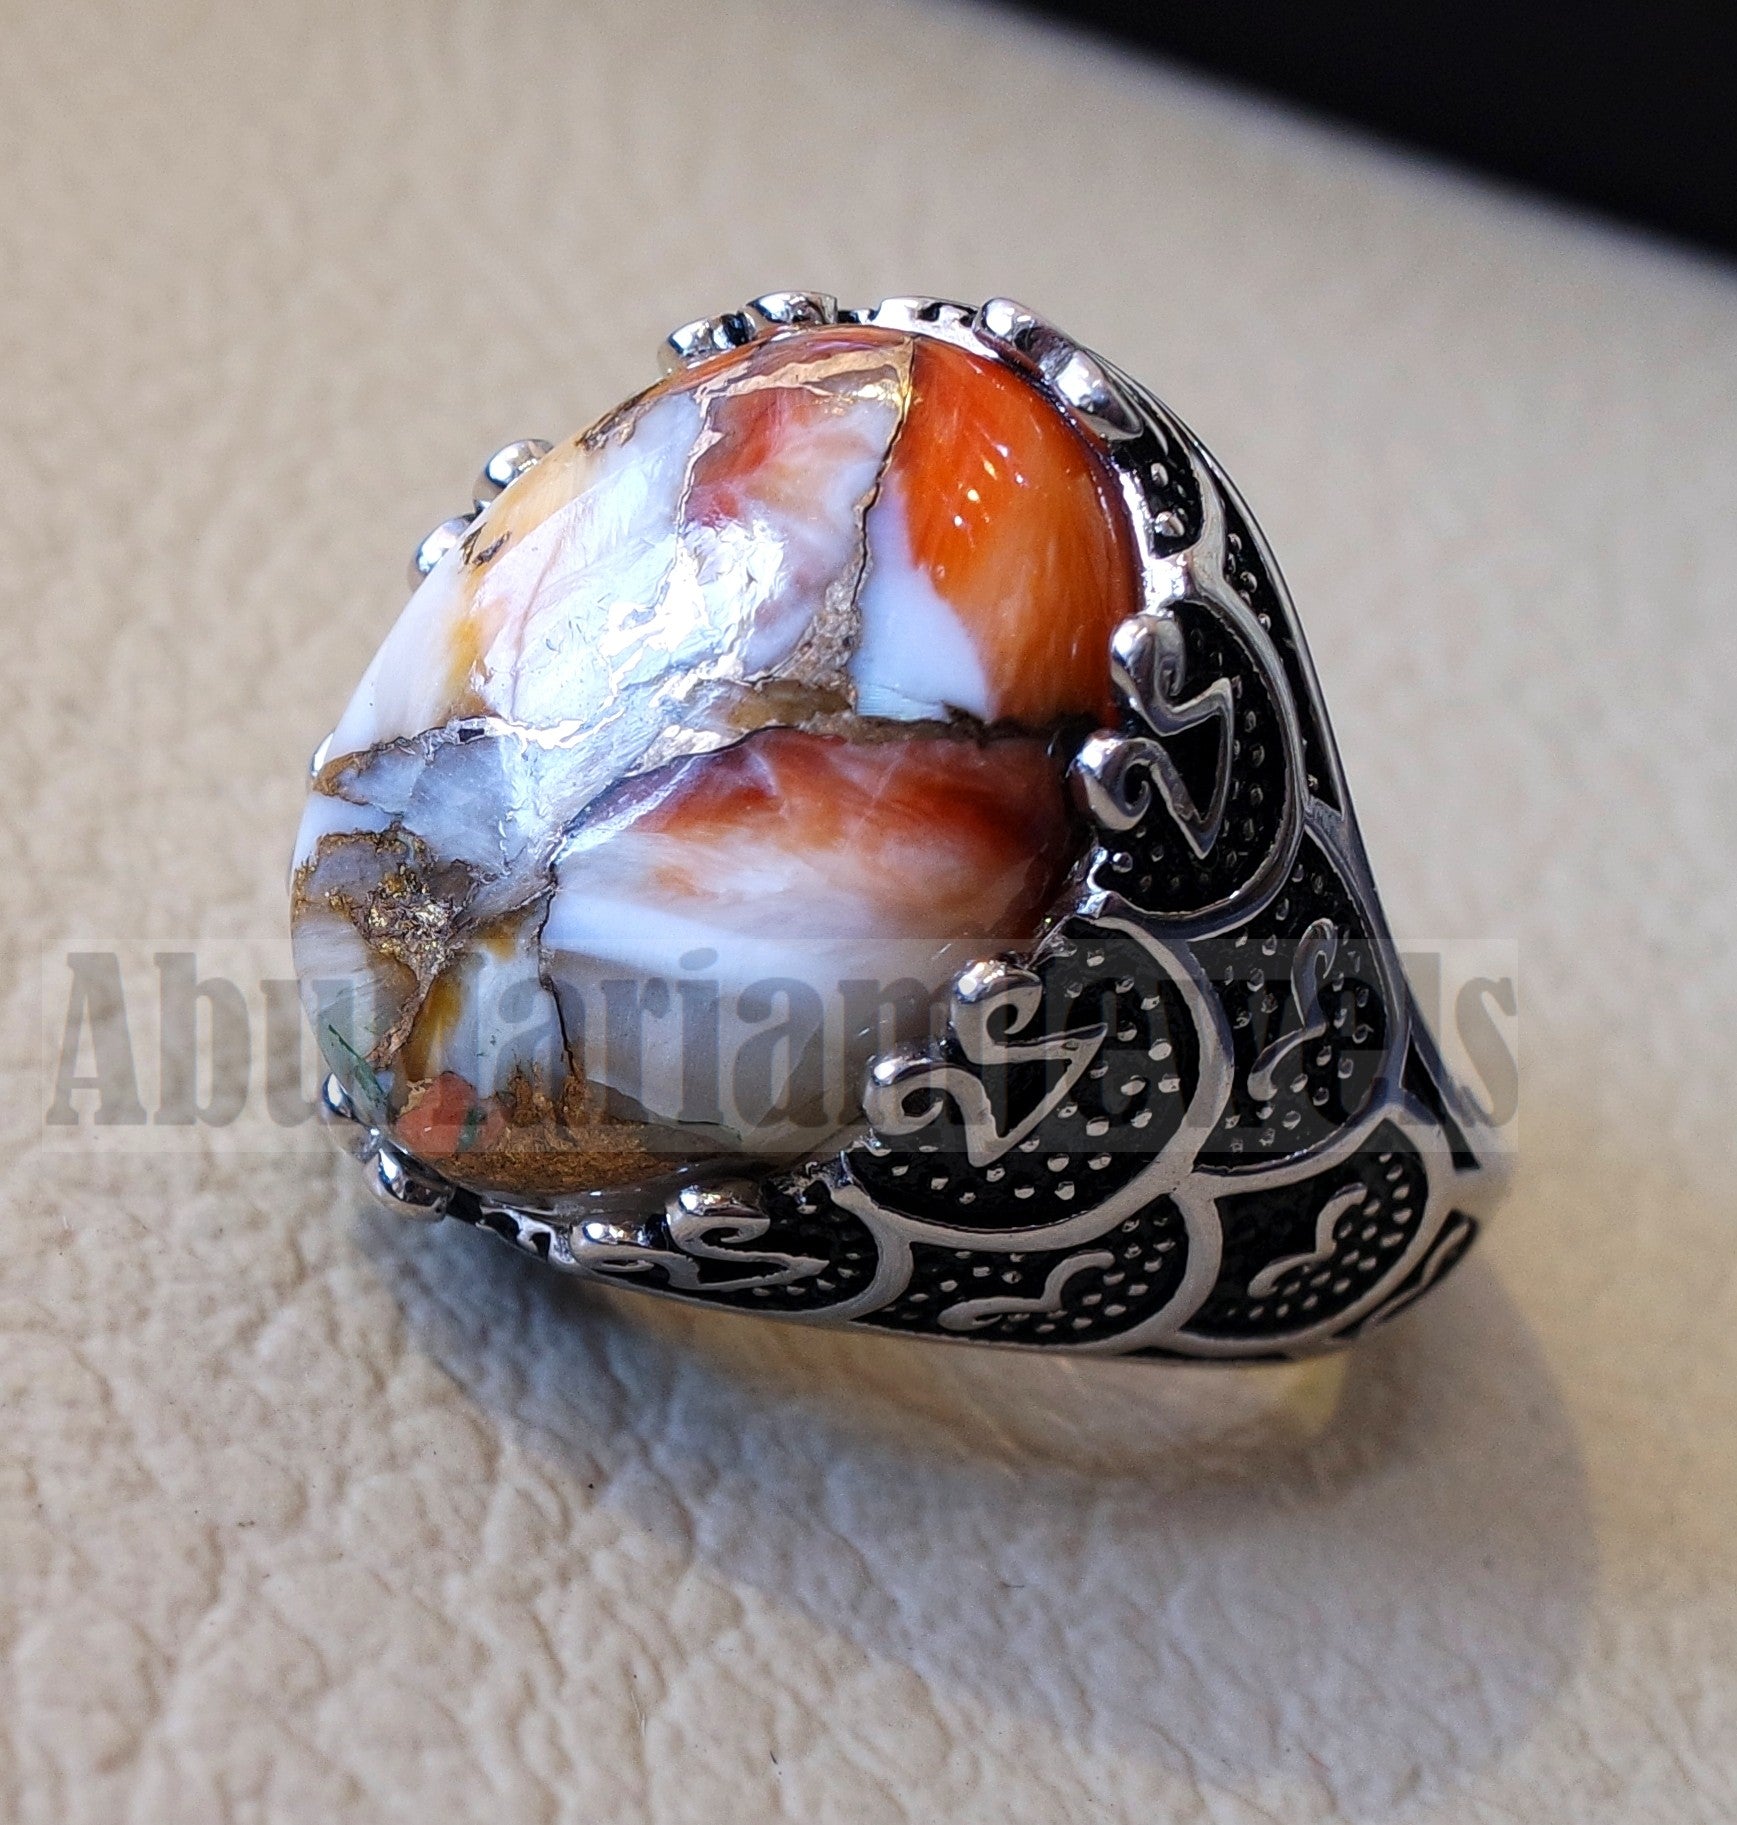 man ring copper oyster natural stone sterling silver 925 oval cabochon semi precious gem ottoman arabic style all sizes jewelry